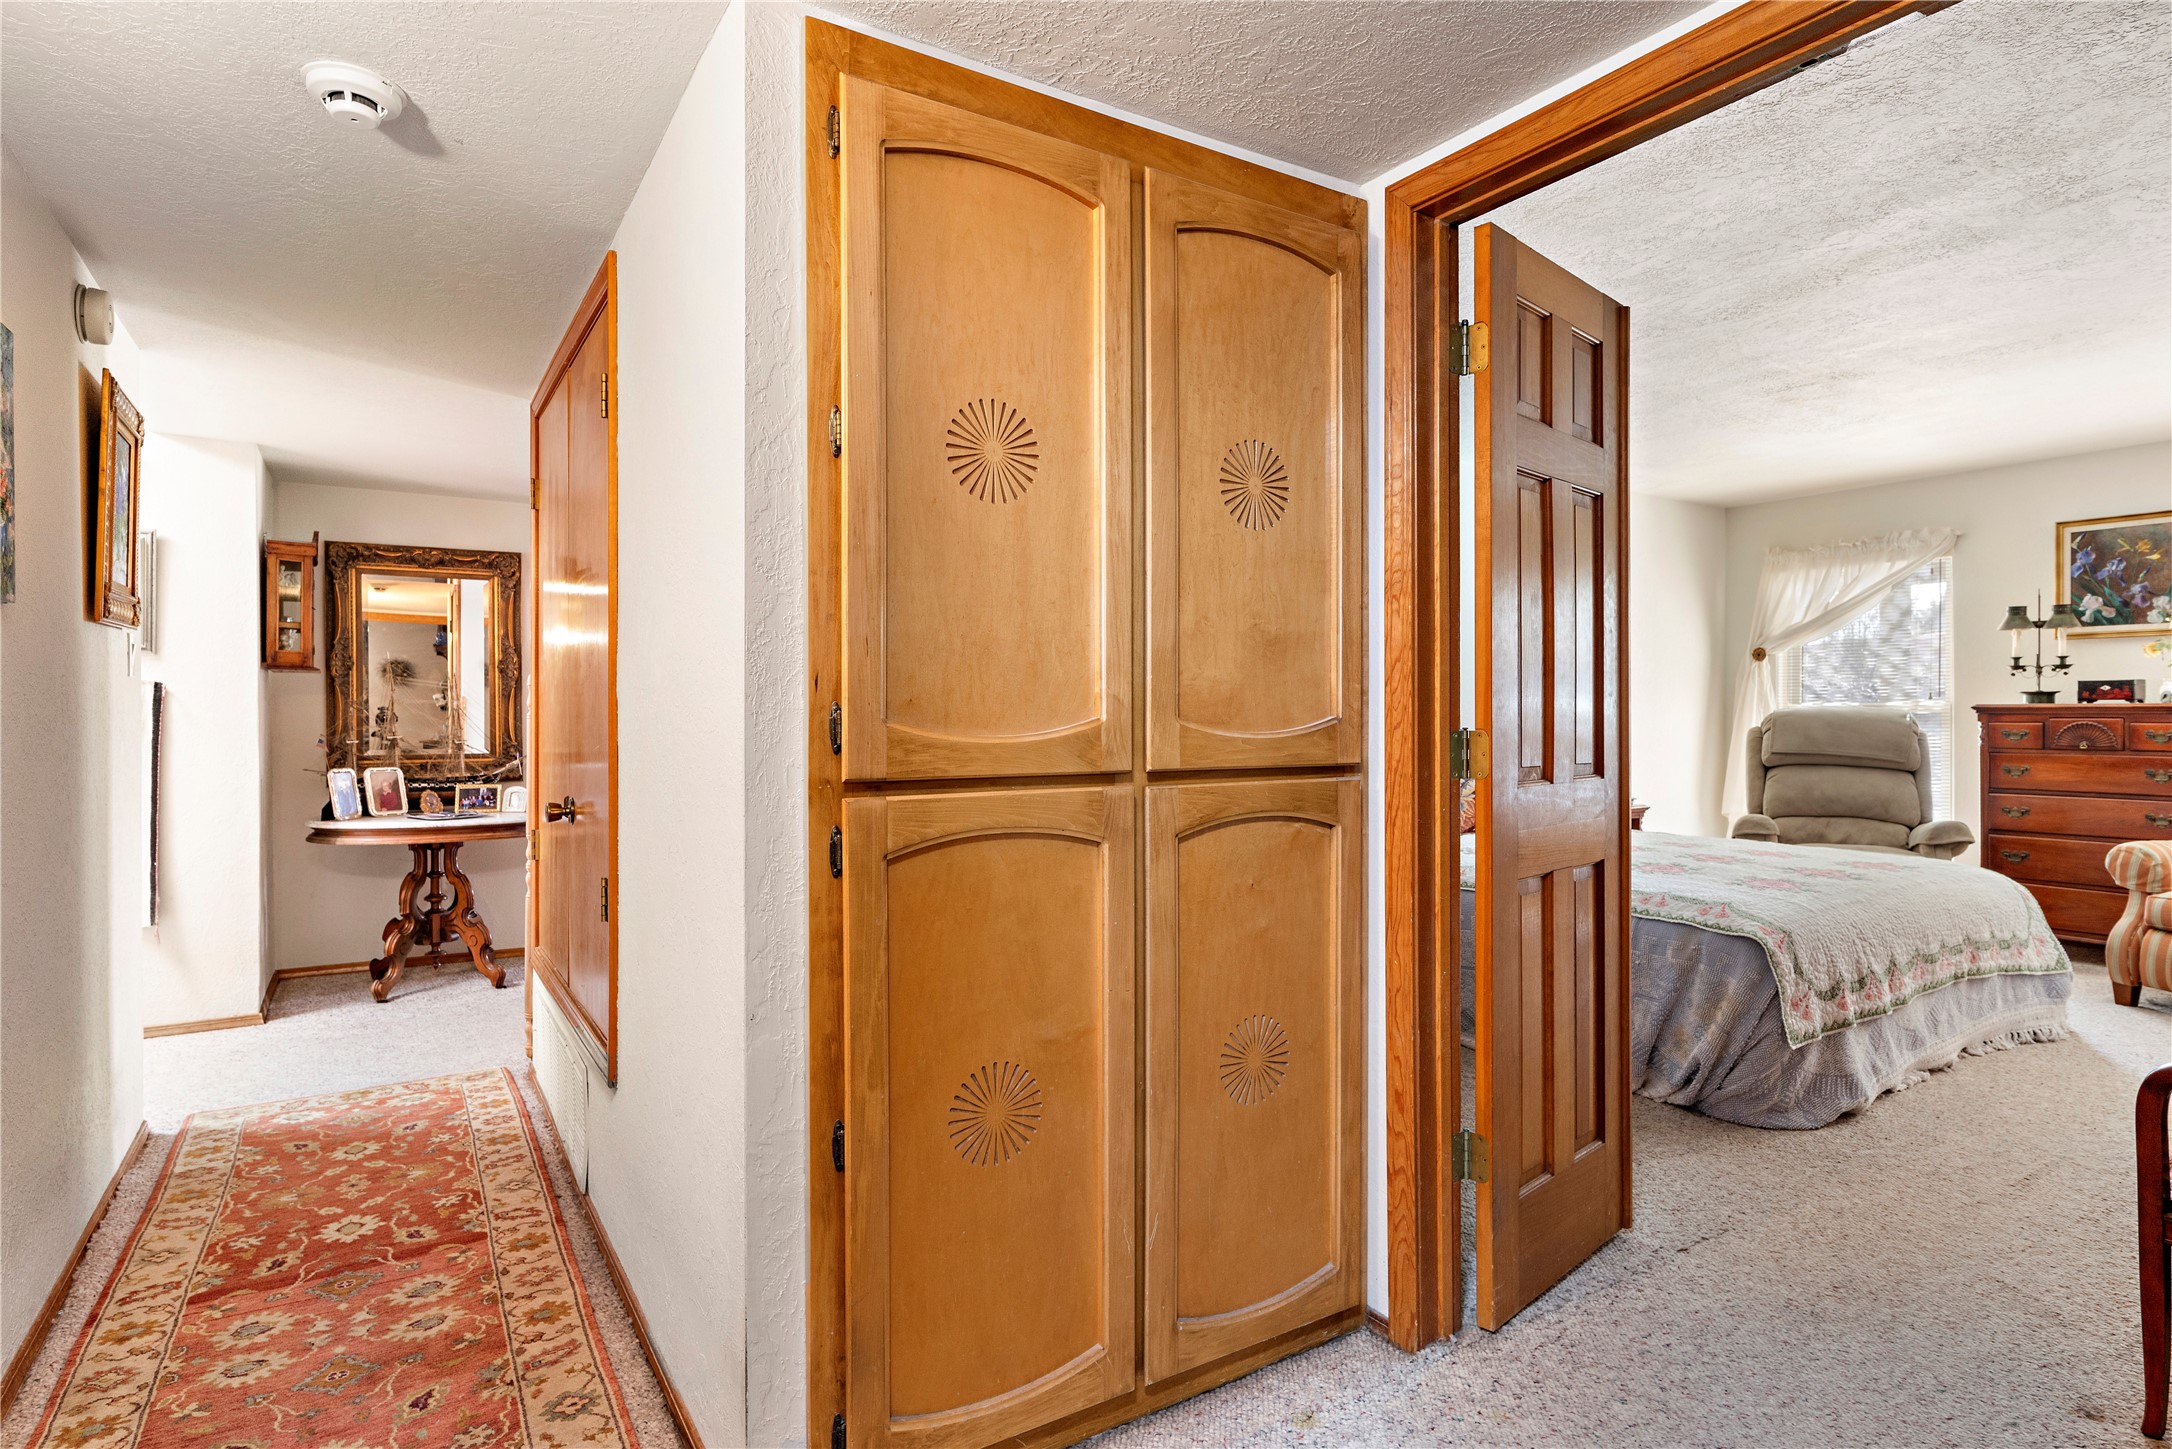 Built in linen cabinets at double door entry to primary bedroom.